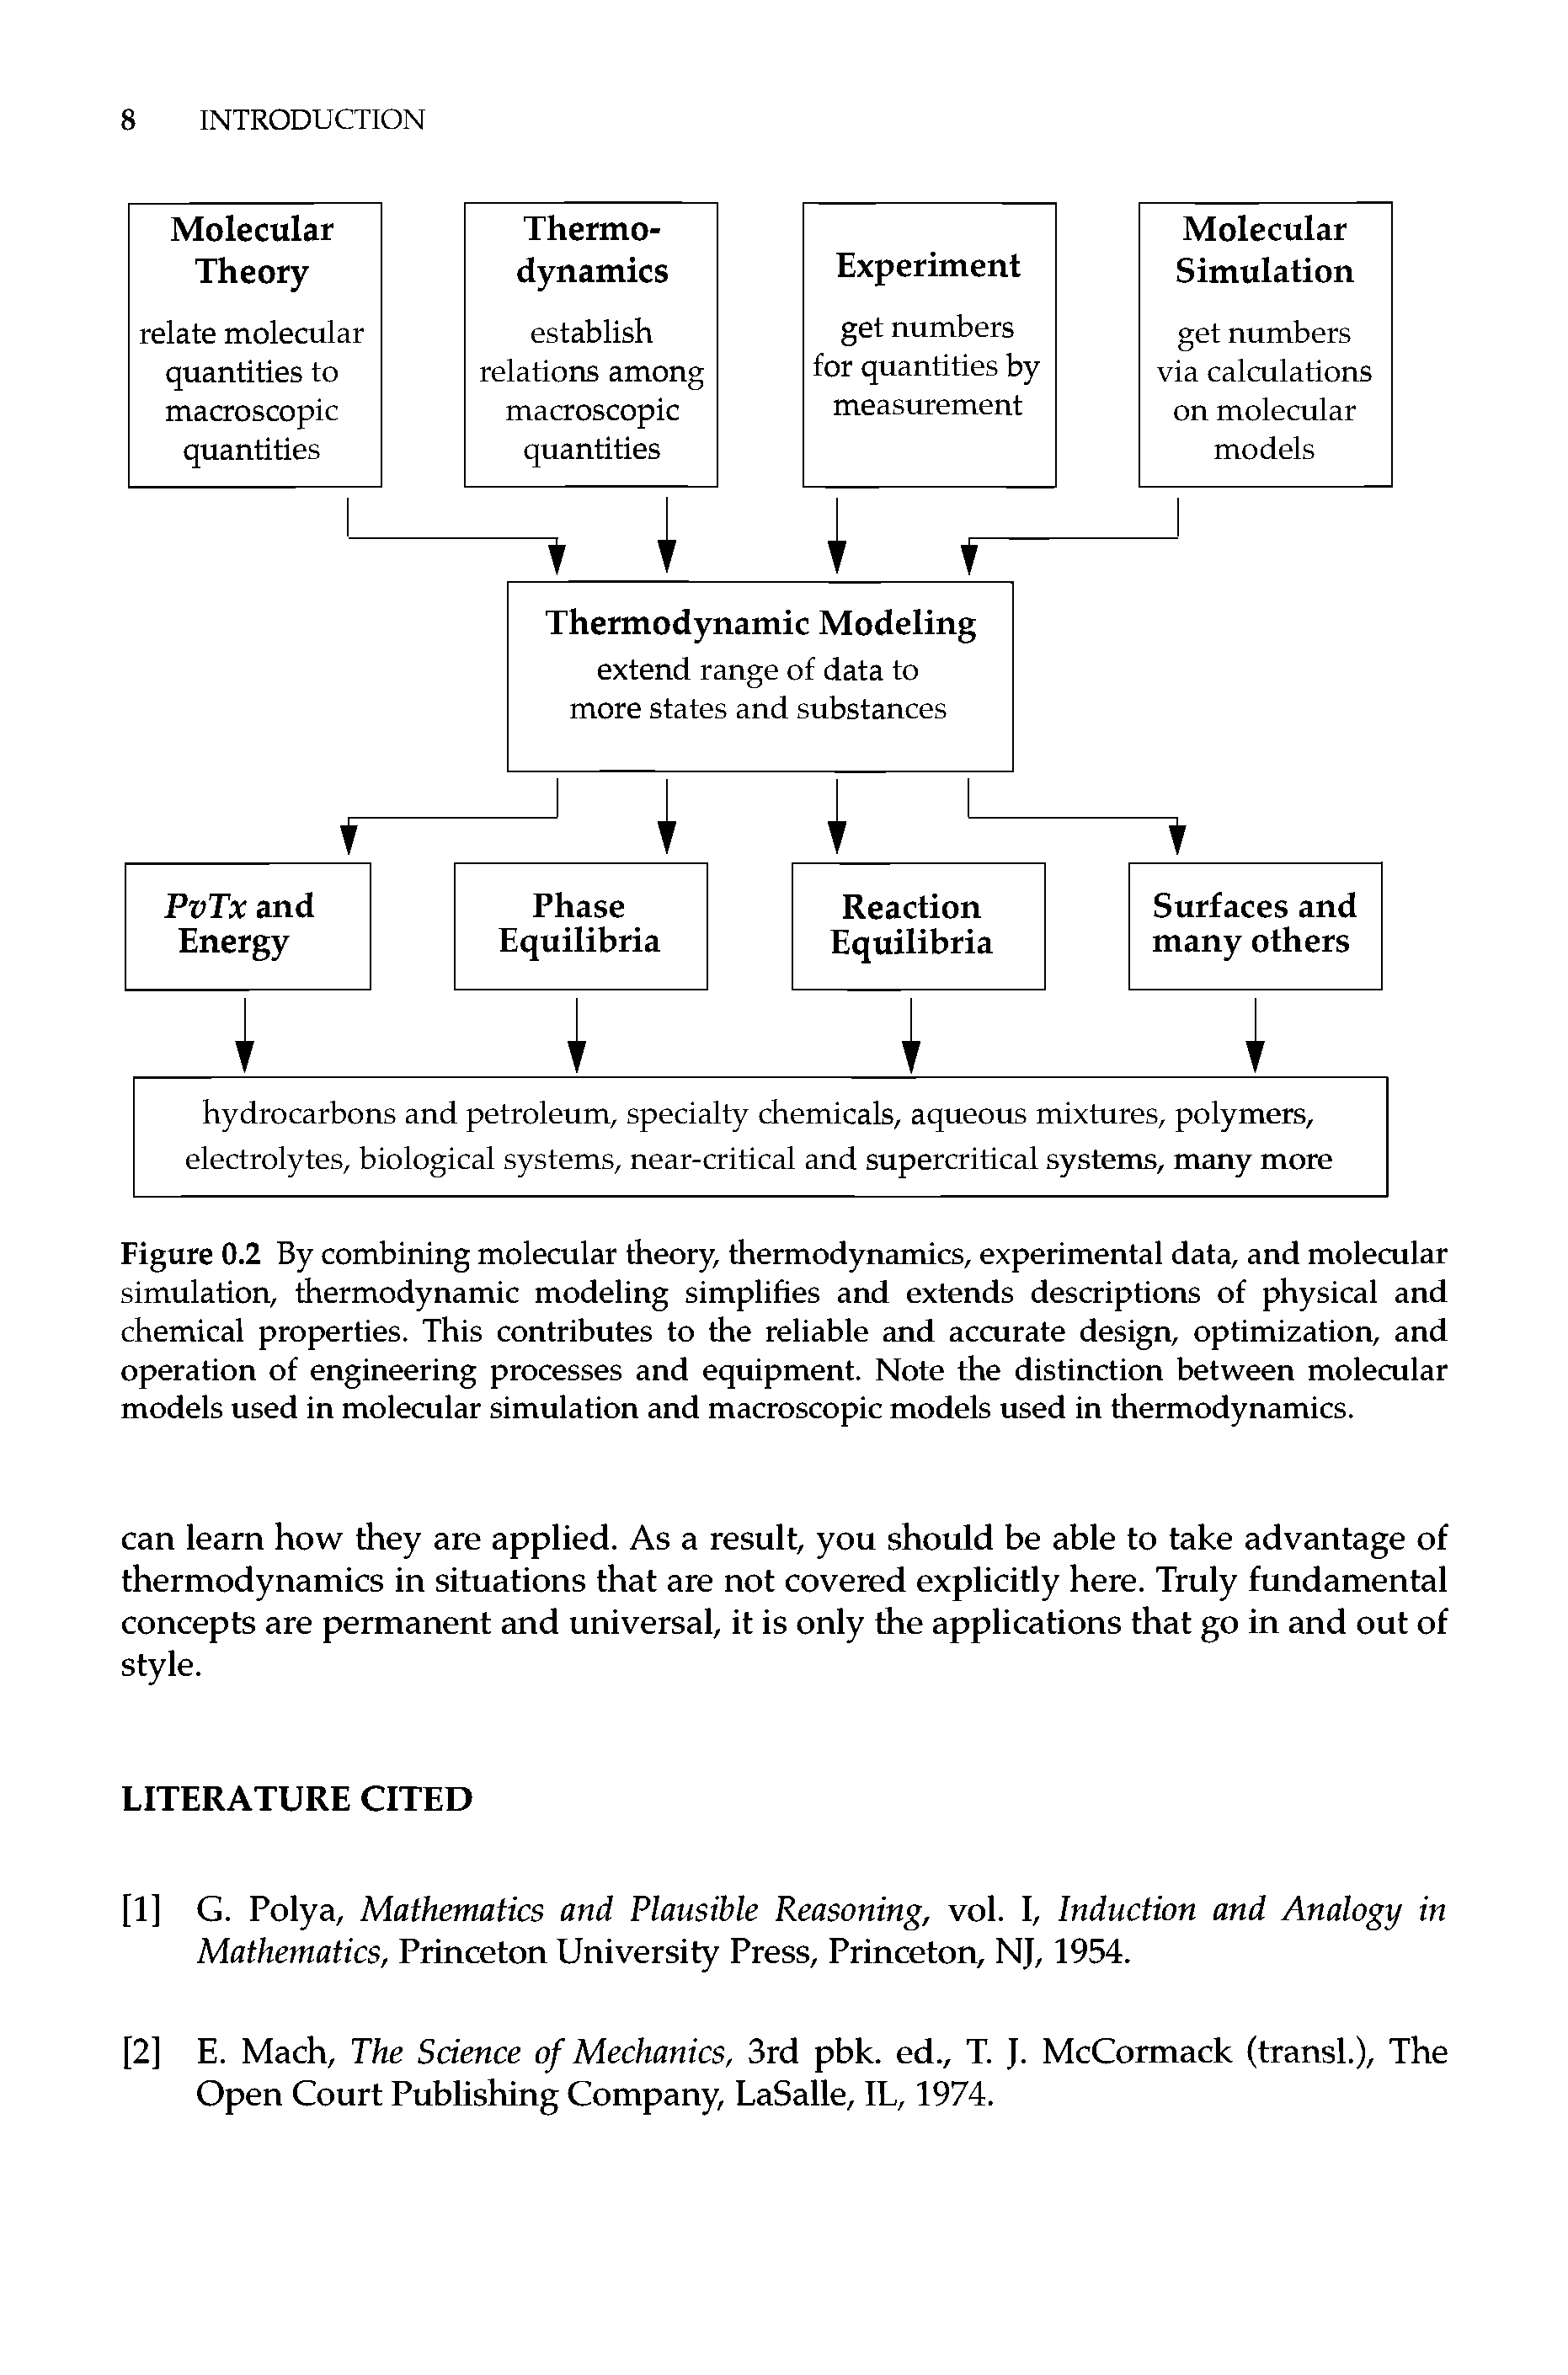 Figure 0.2 By combining molecular theory, thermodynamics, experimental data, and molecular simulation, thermodynamic modeling simplifies and extends descriptions of physical and chemical properties. This contributes to the reliable and accurate design, optimization, and operation of engineering processes and equipment. Note the distinction between molecular models used in molecular simulation and macroscopic models used in thermodynamics.